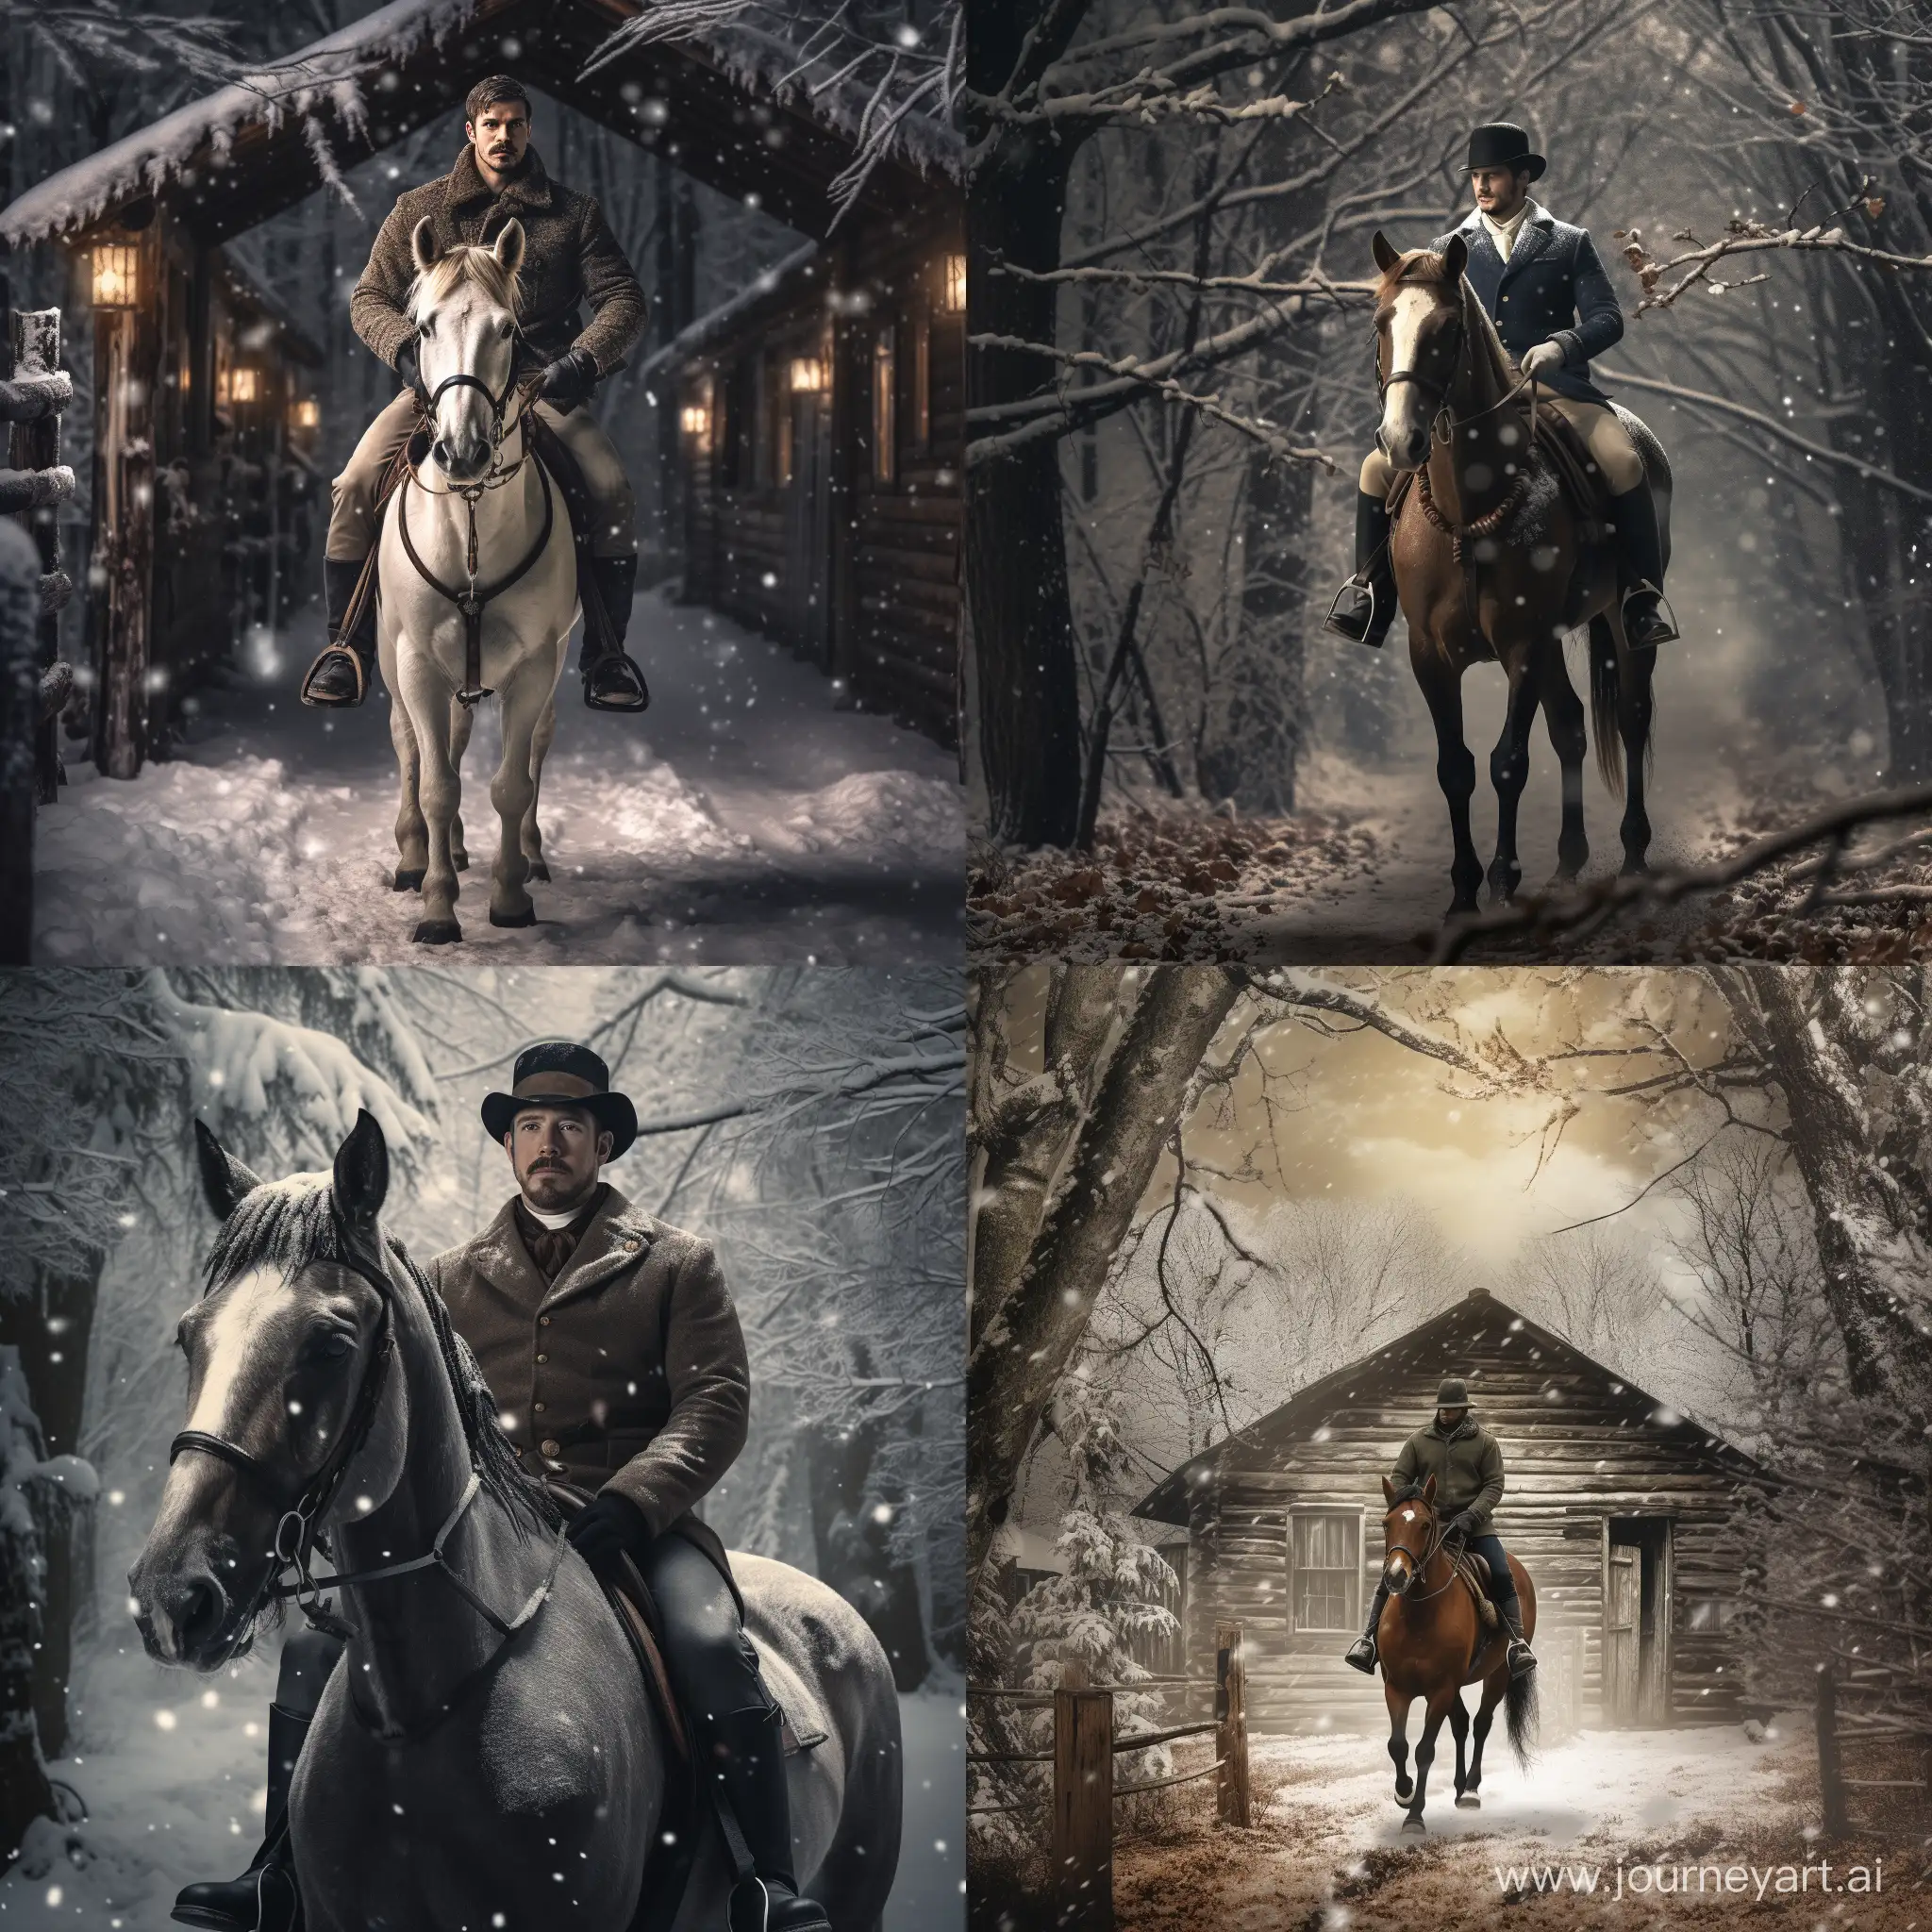 Snowy-Trail-Horse-Riding-with-English-Gentleman